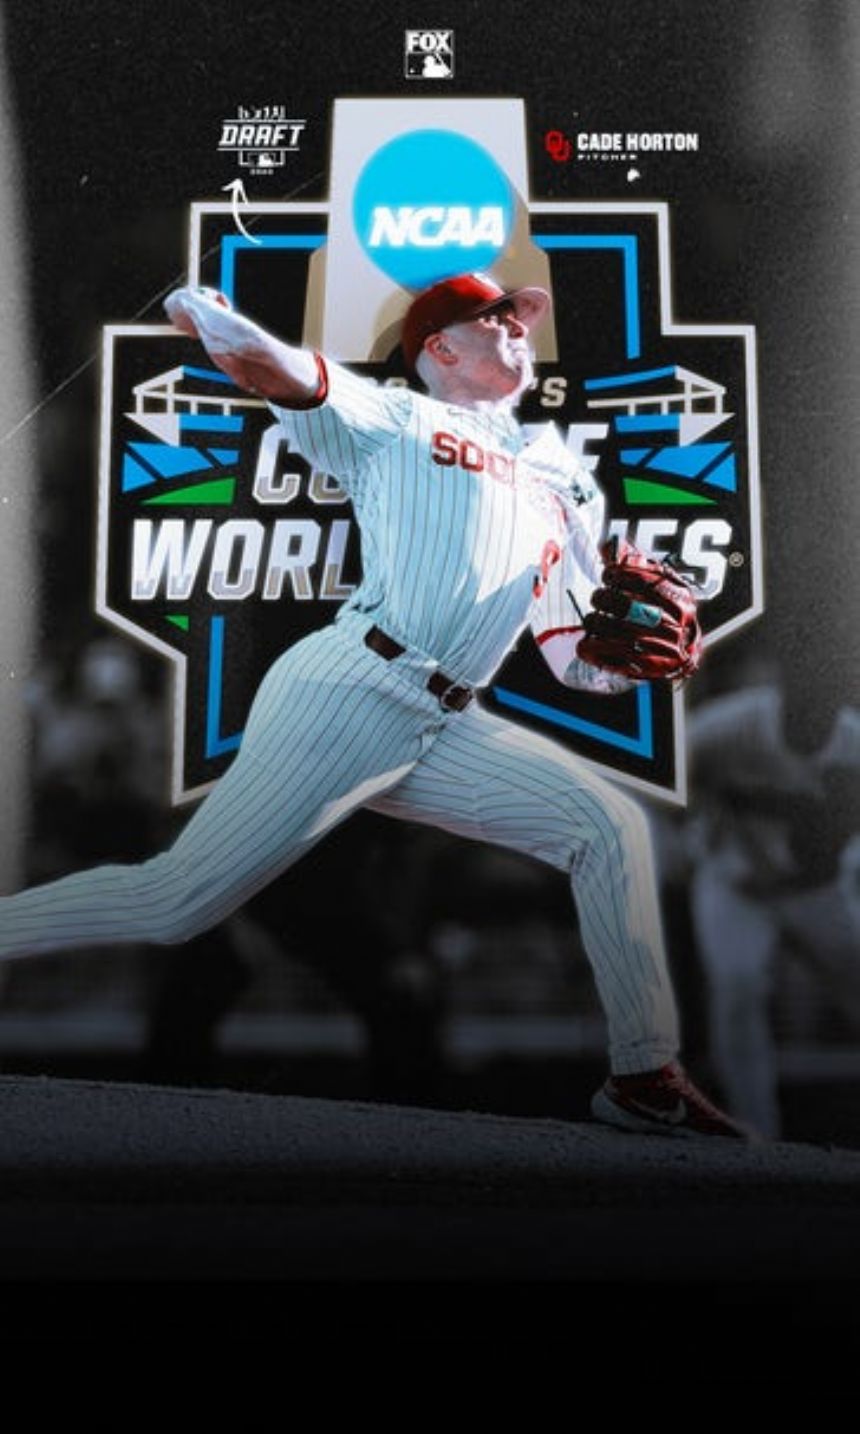 MLB Draft in July gives College World Series increased stature